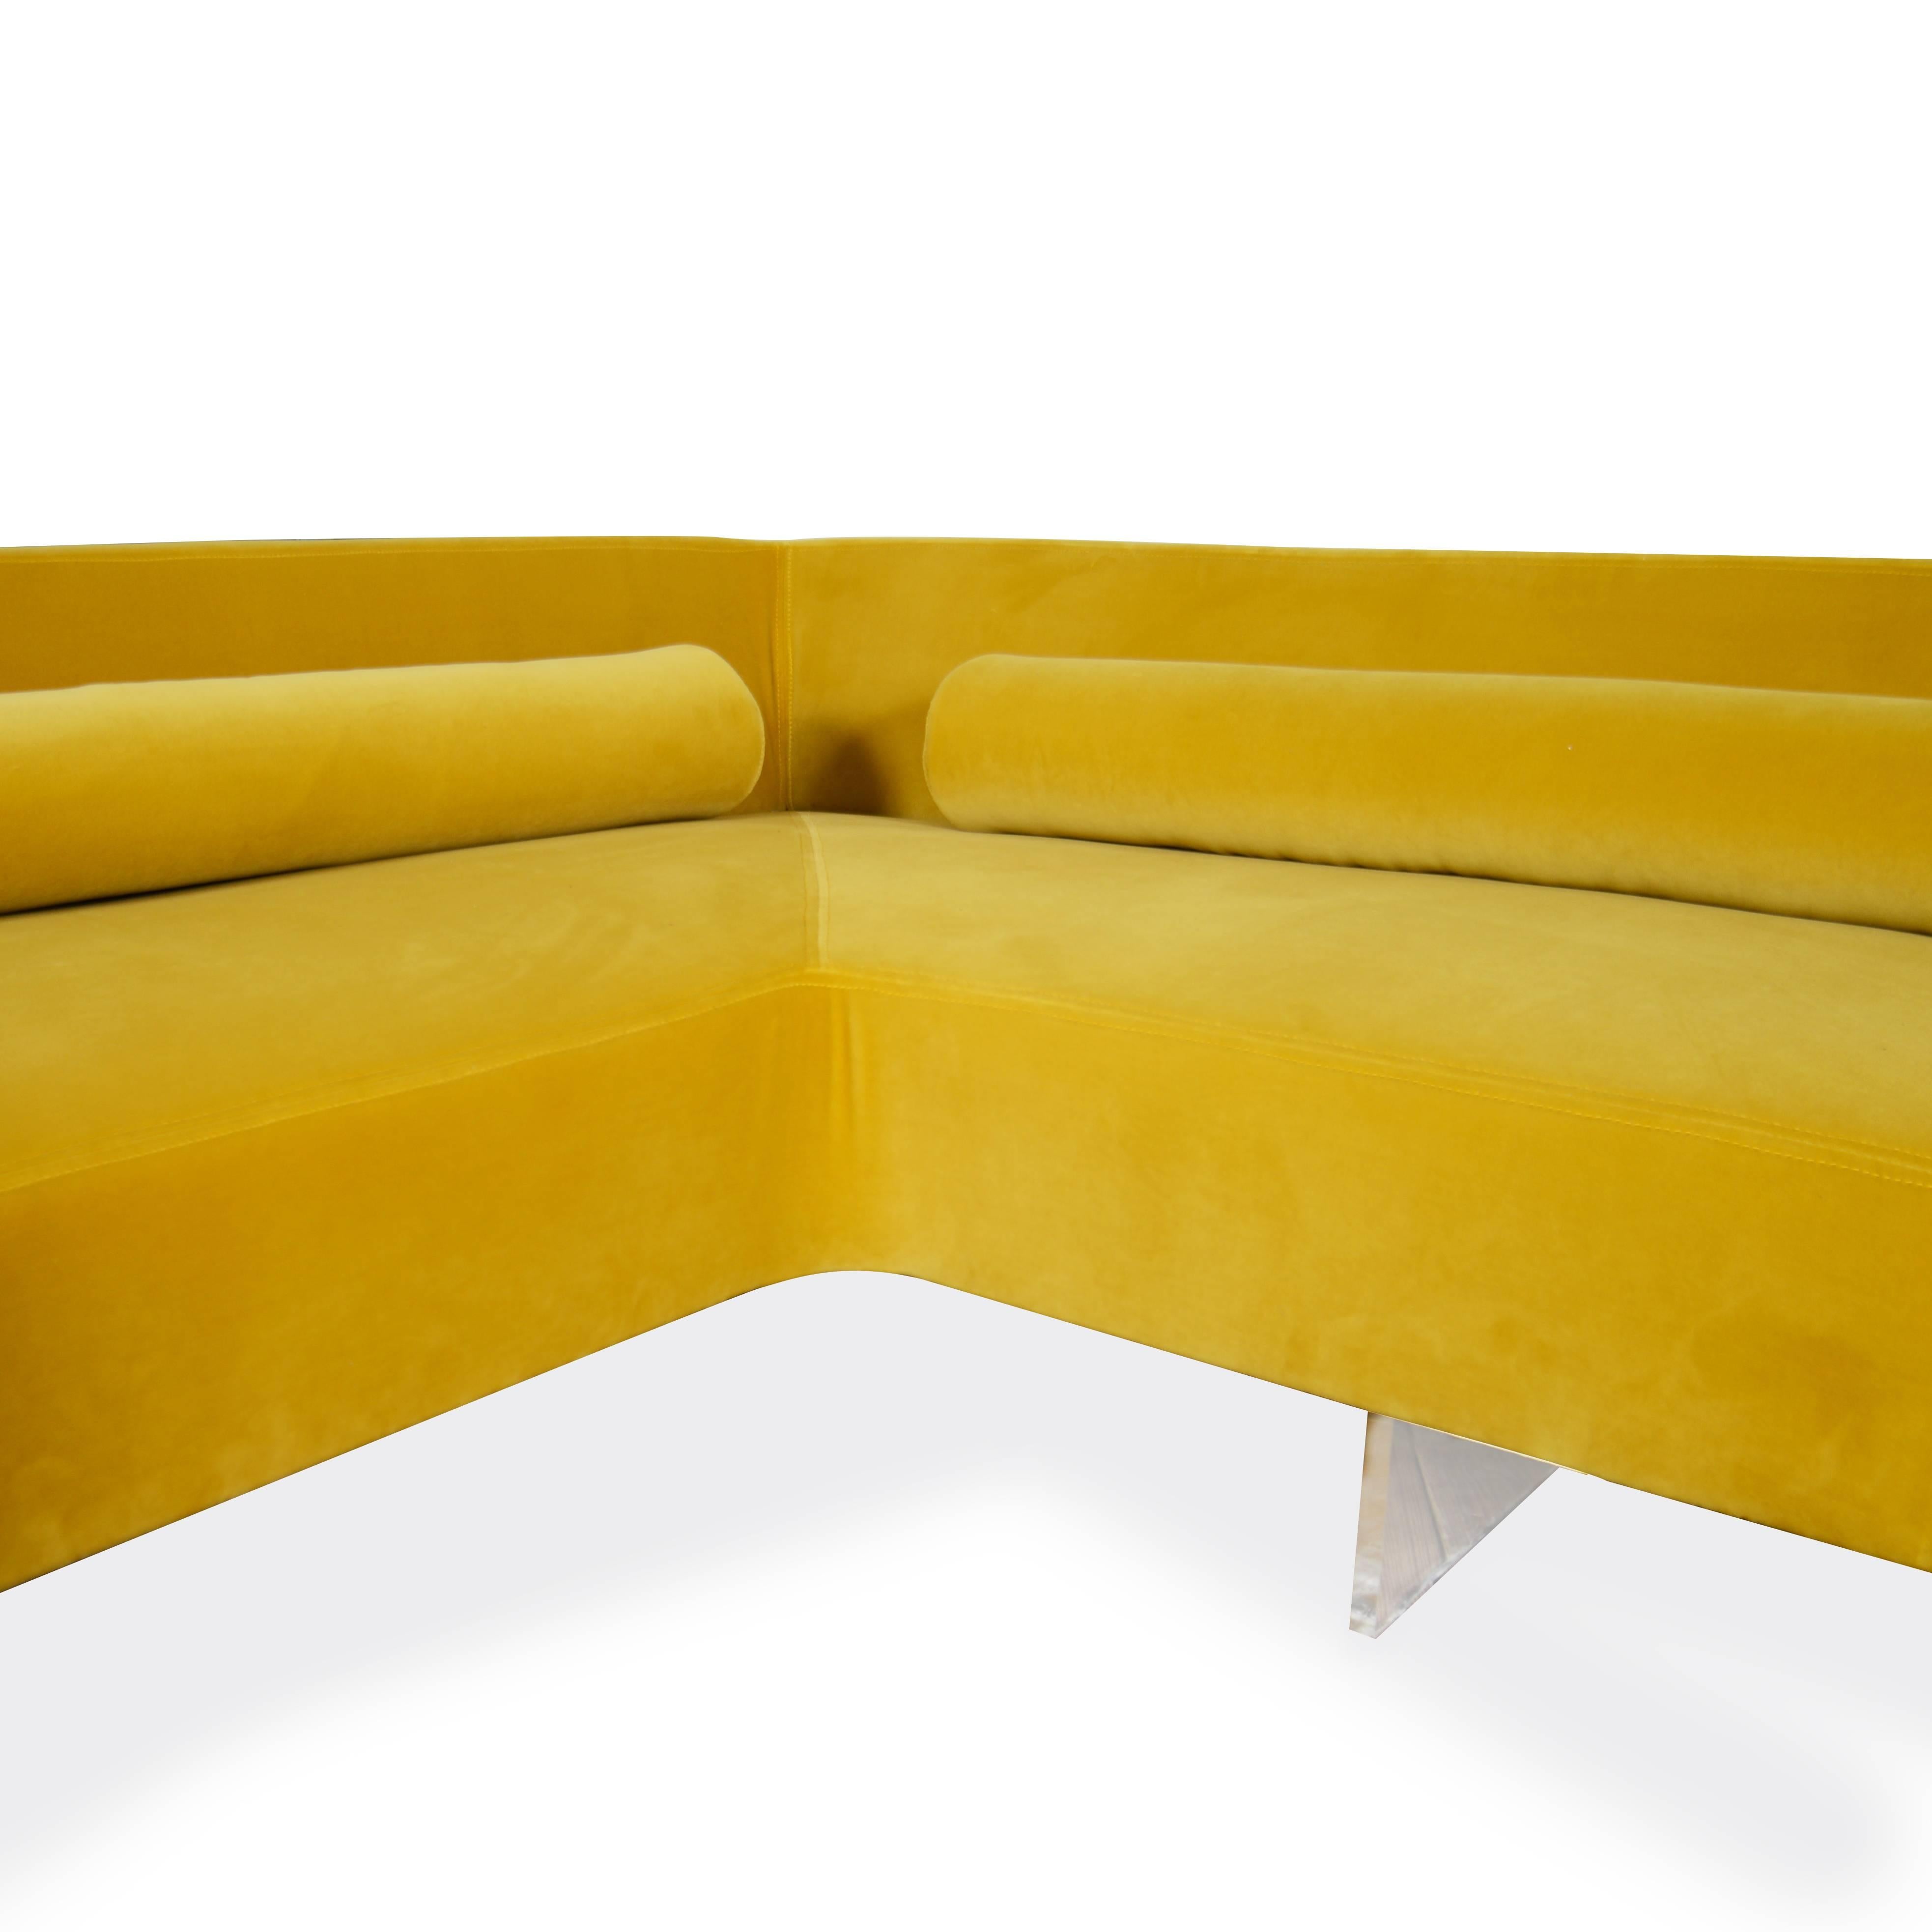 Two part sectional sofa on Lucite base upholstered in marigold yellow velvet. 
Left corner with extension. 60" D x 90" W x 27.5" H
Left love seat with extension. 32" D x 72" W x 27.5" H.